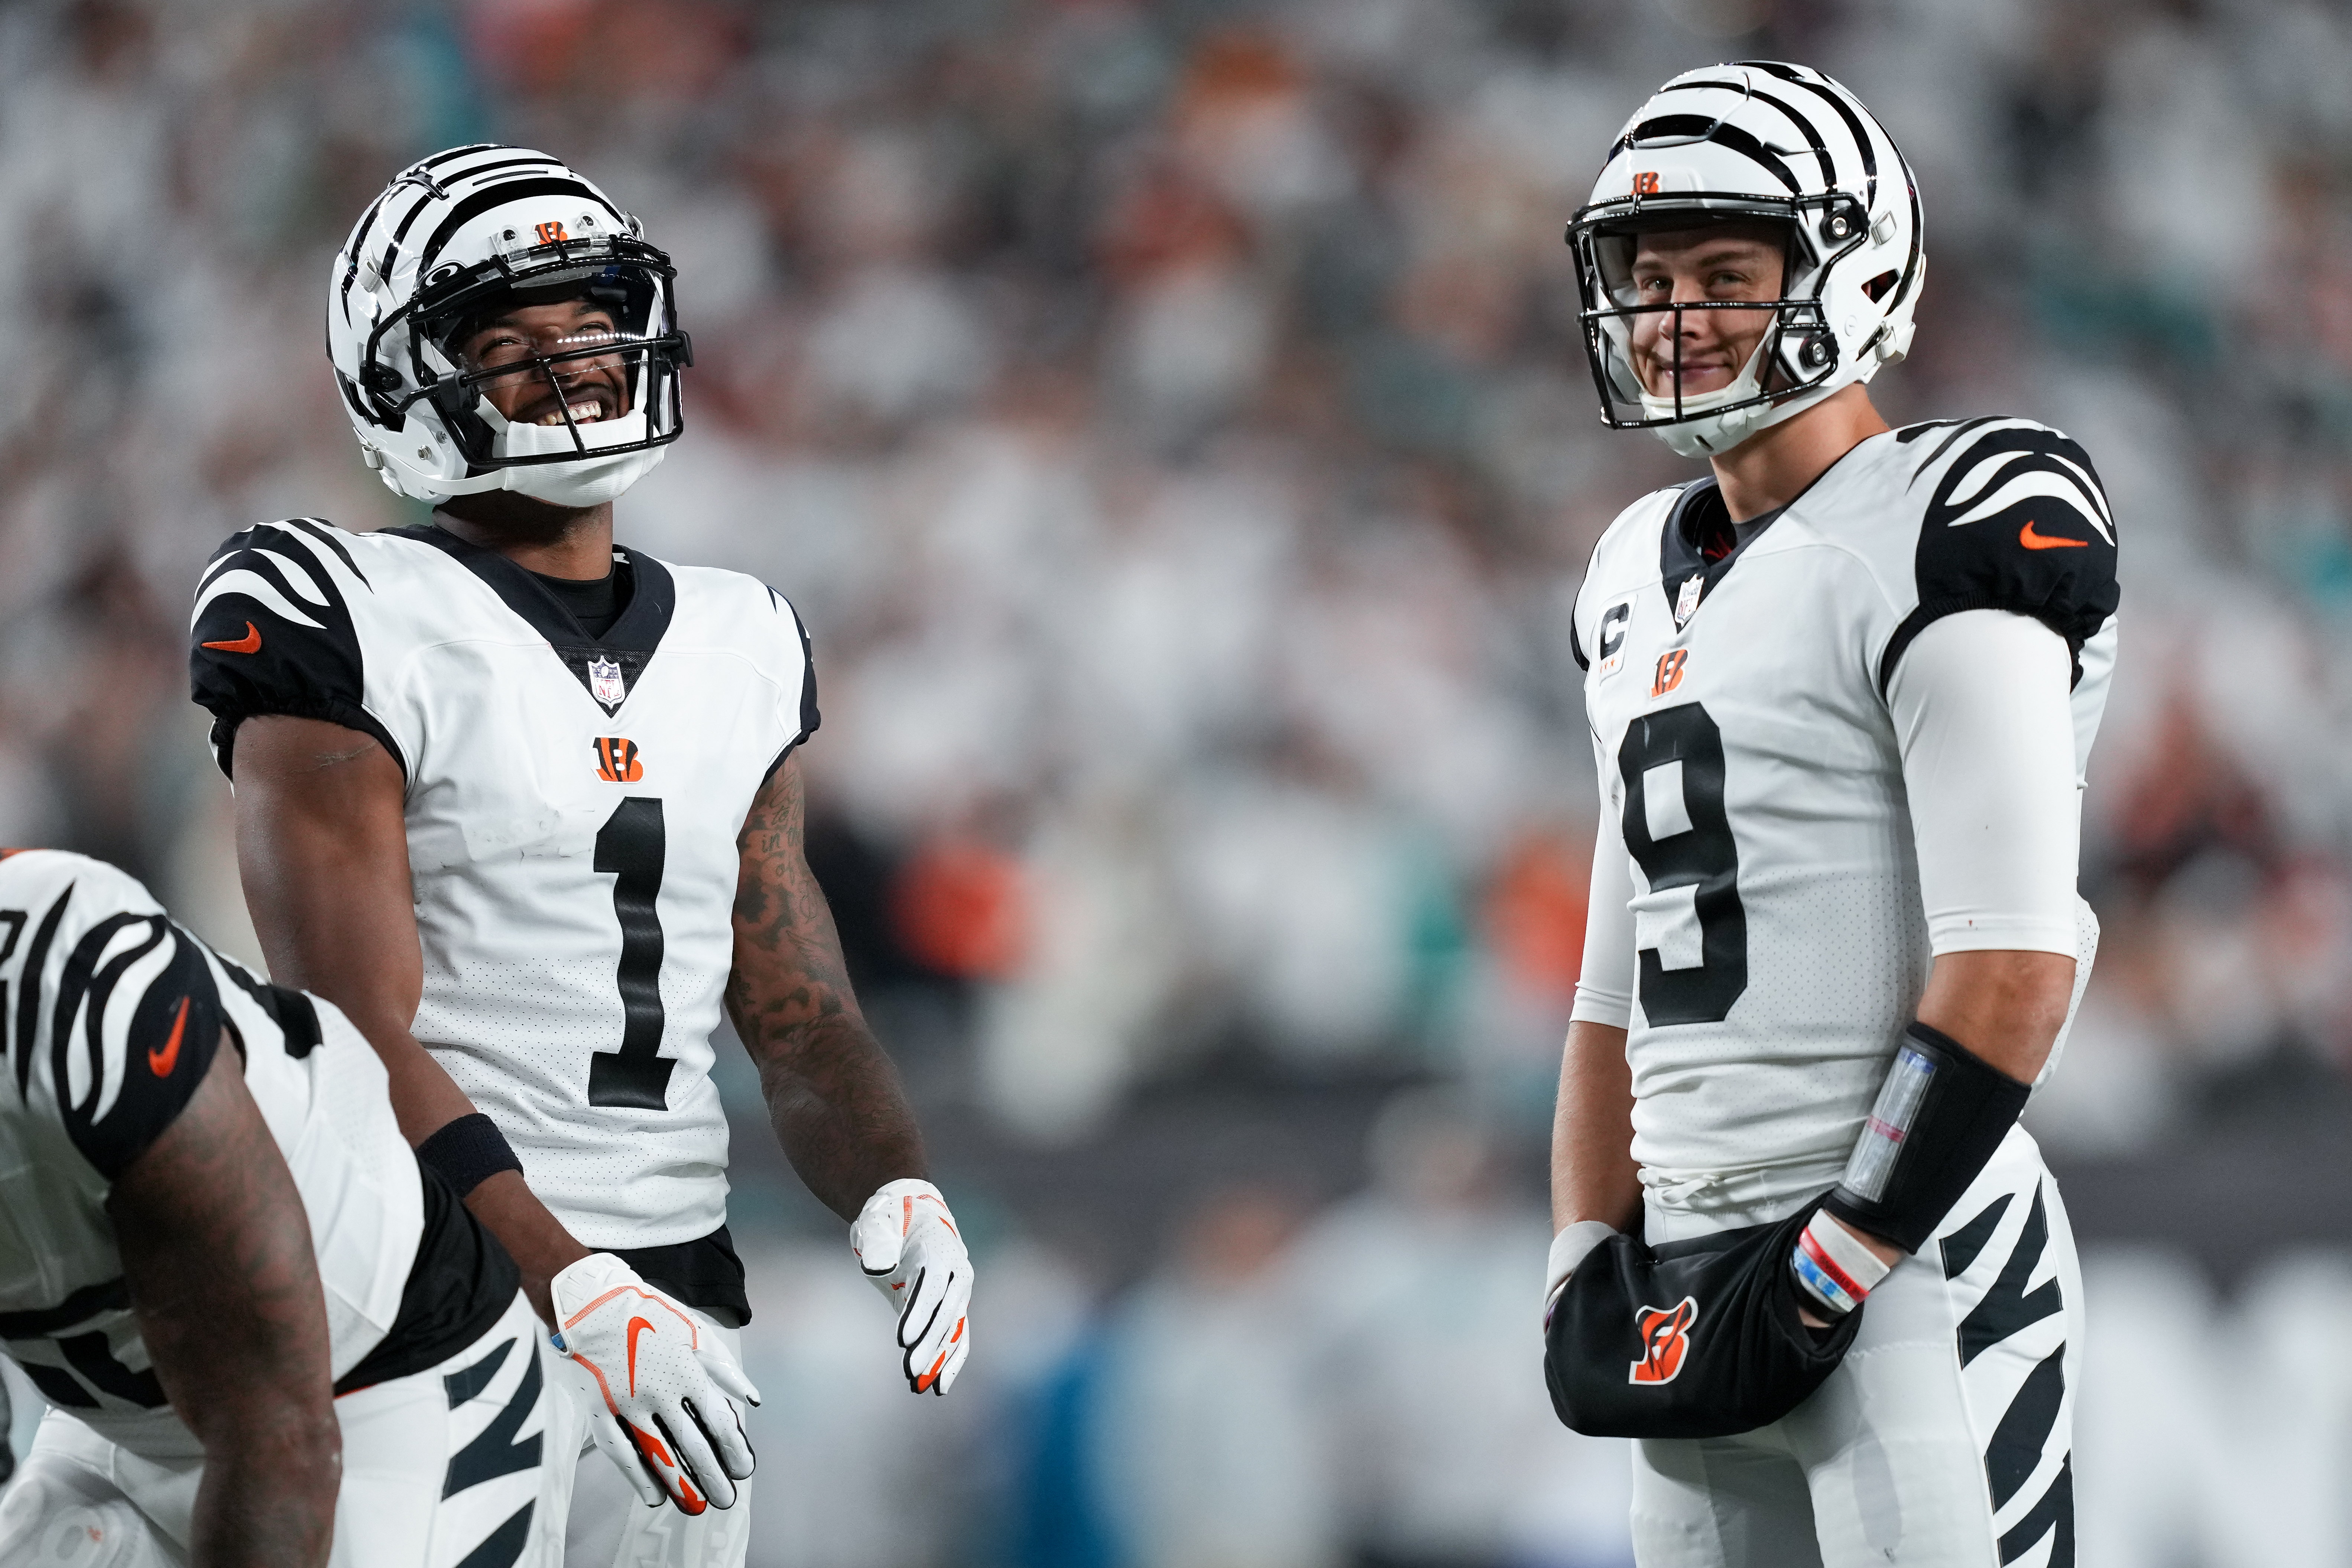 Bengals to wear 'White Bengal' uniforms tonight against Rams for